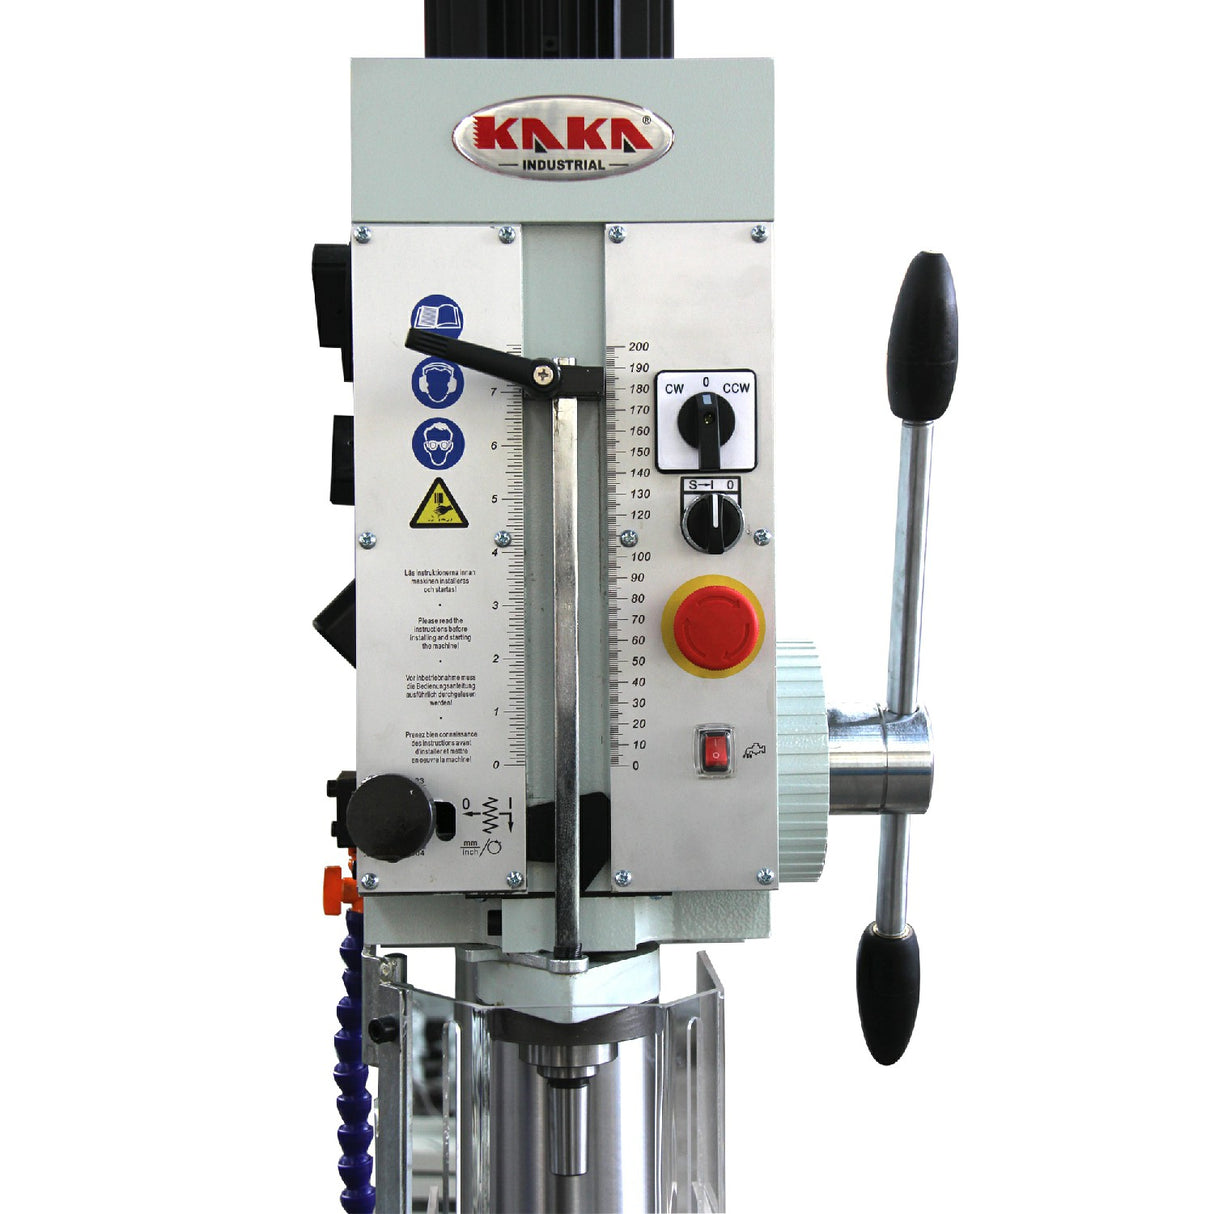 KANG Industrial GD-40, Gear Head Drill Machine with Coolant System, 415V Motor